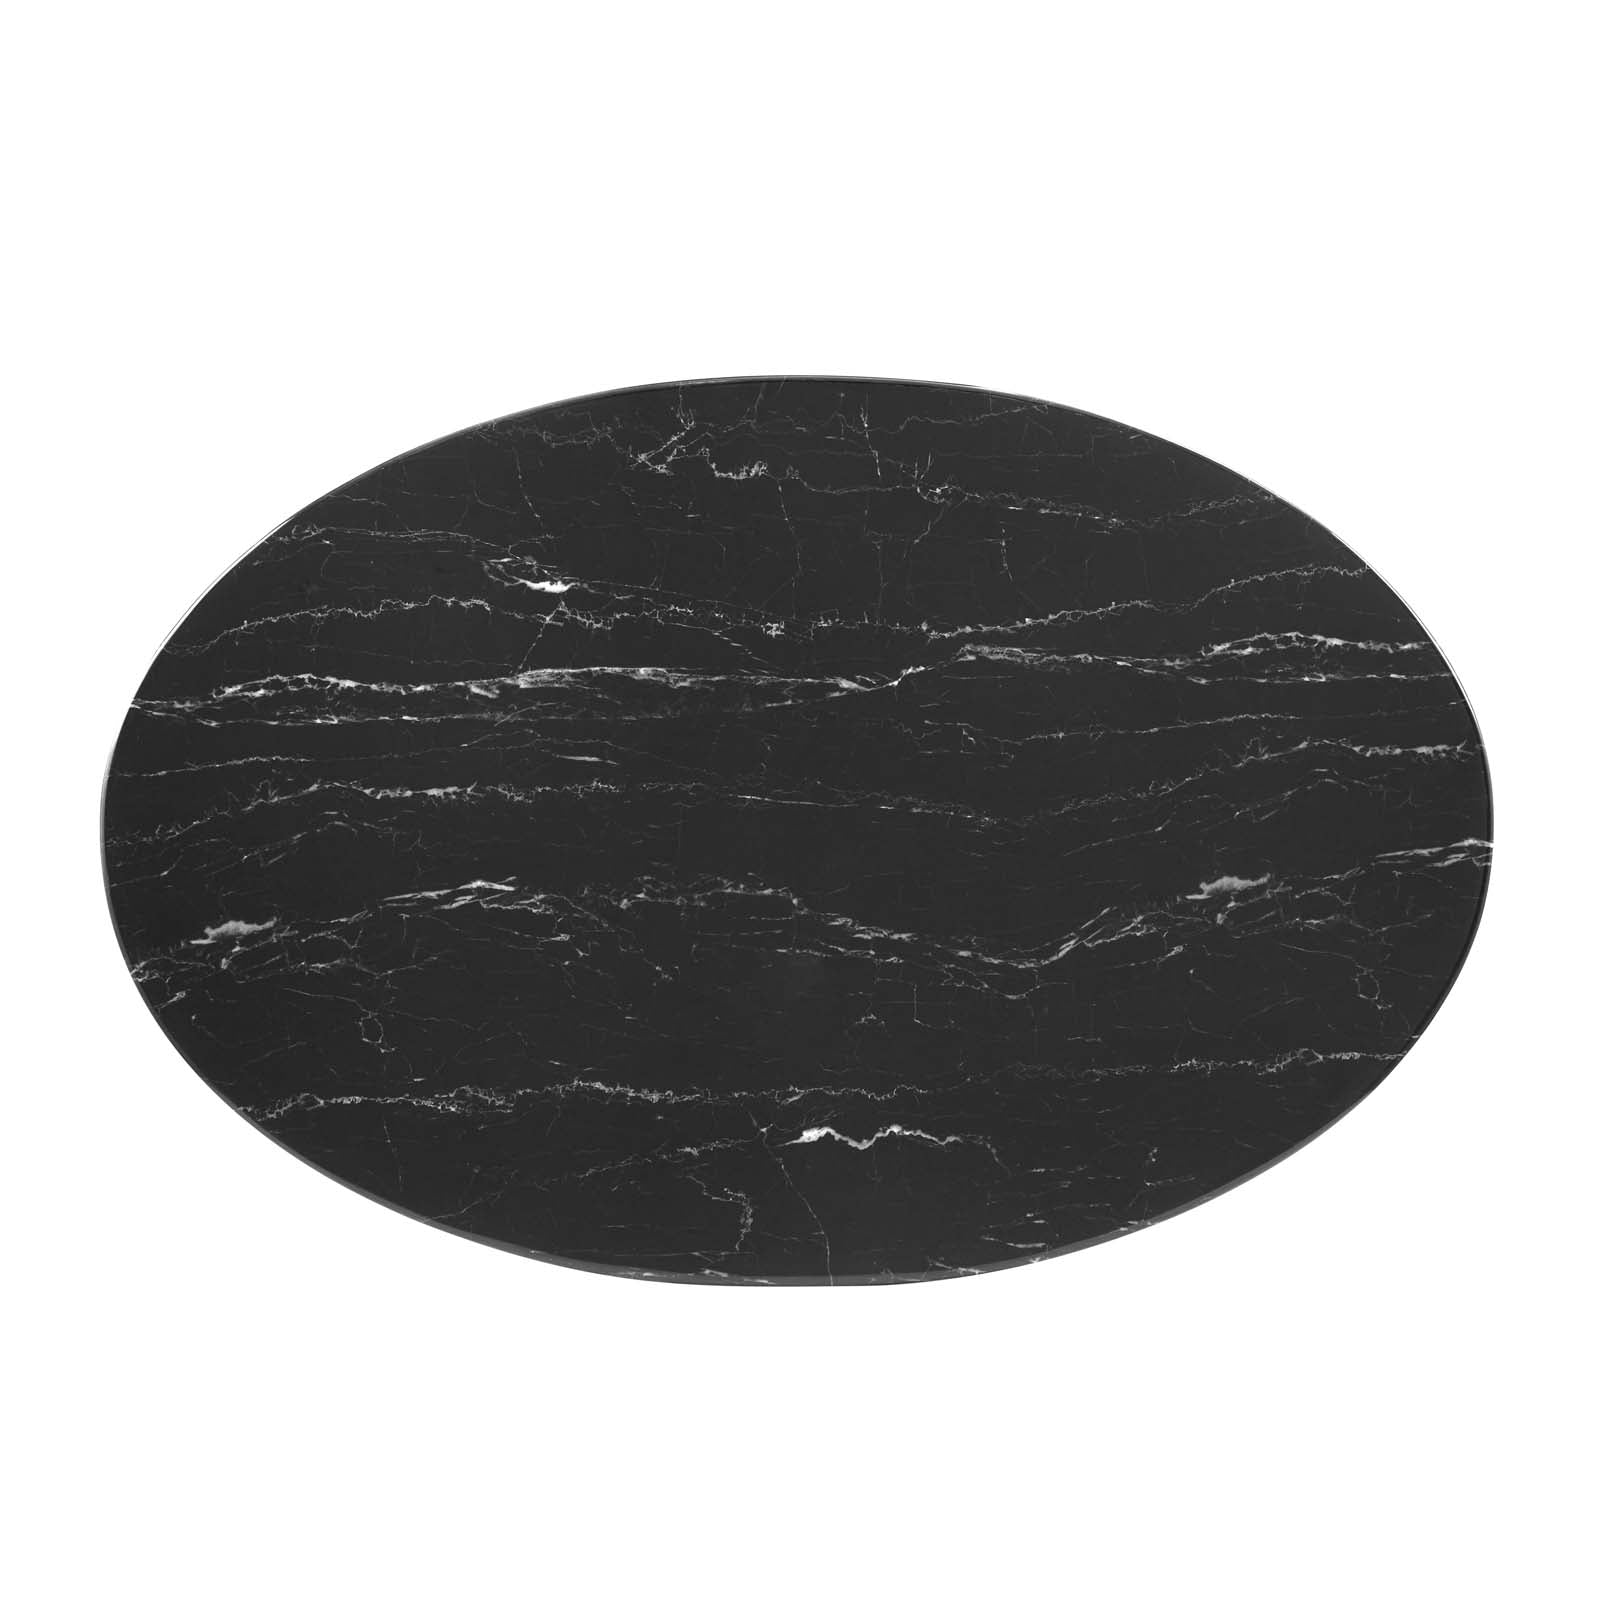 Modway Dining Tables - Verne-42"-Artificial-Marble-Dining-Table-Gold-Black